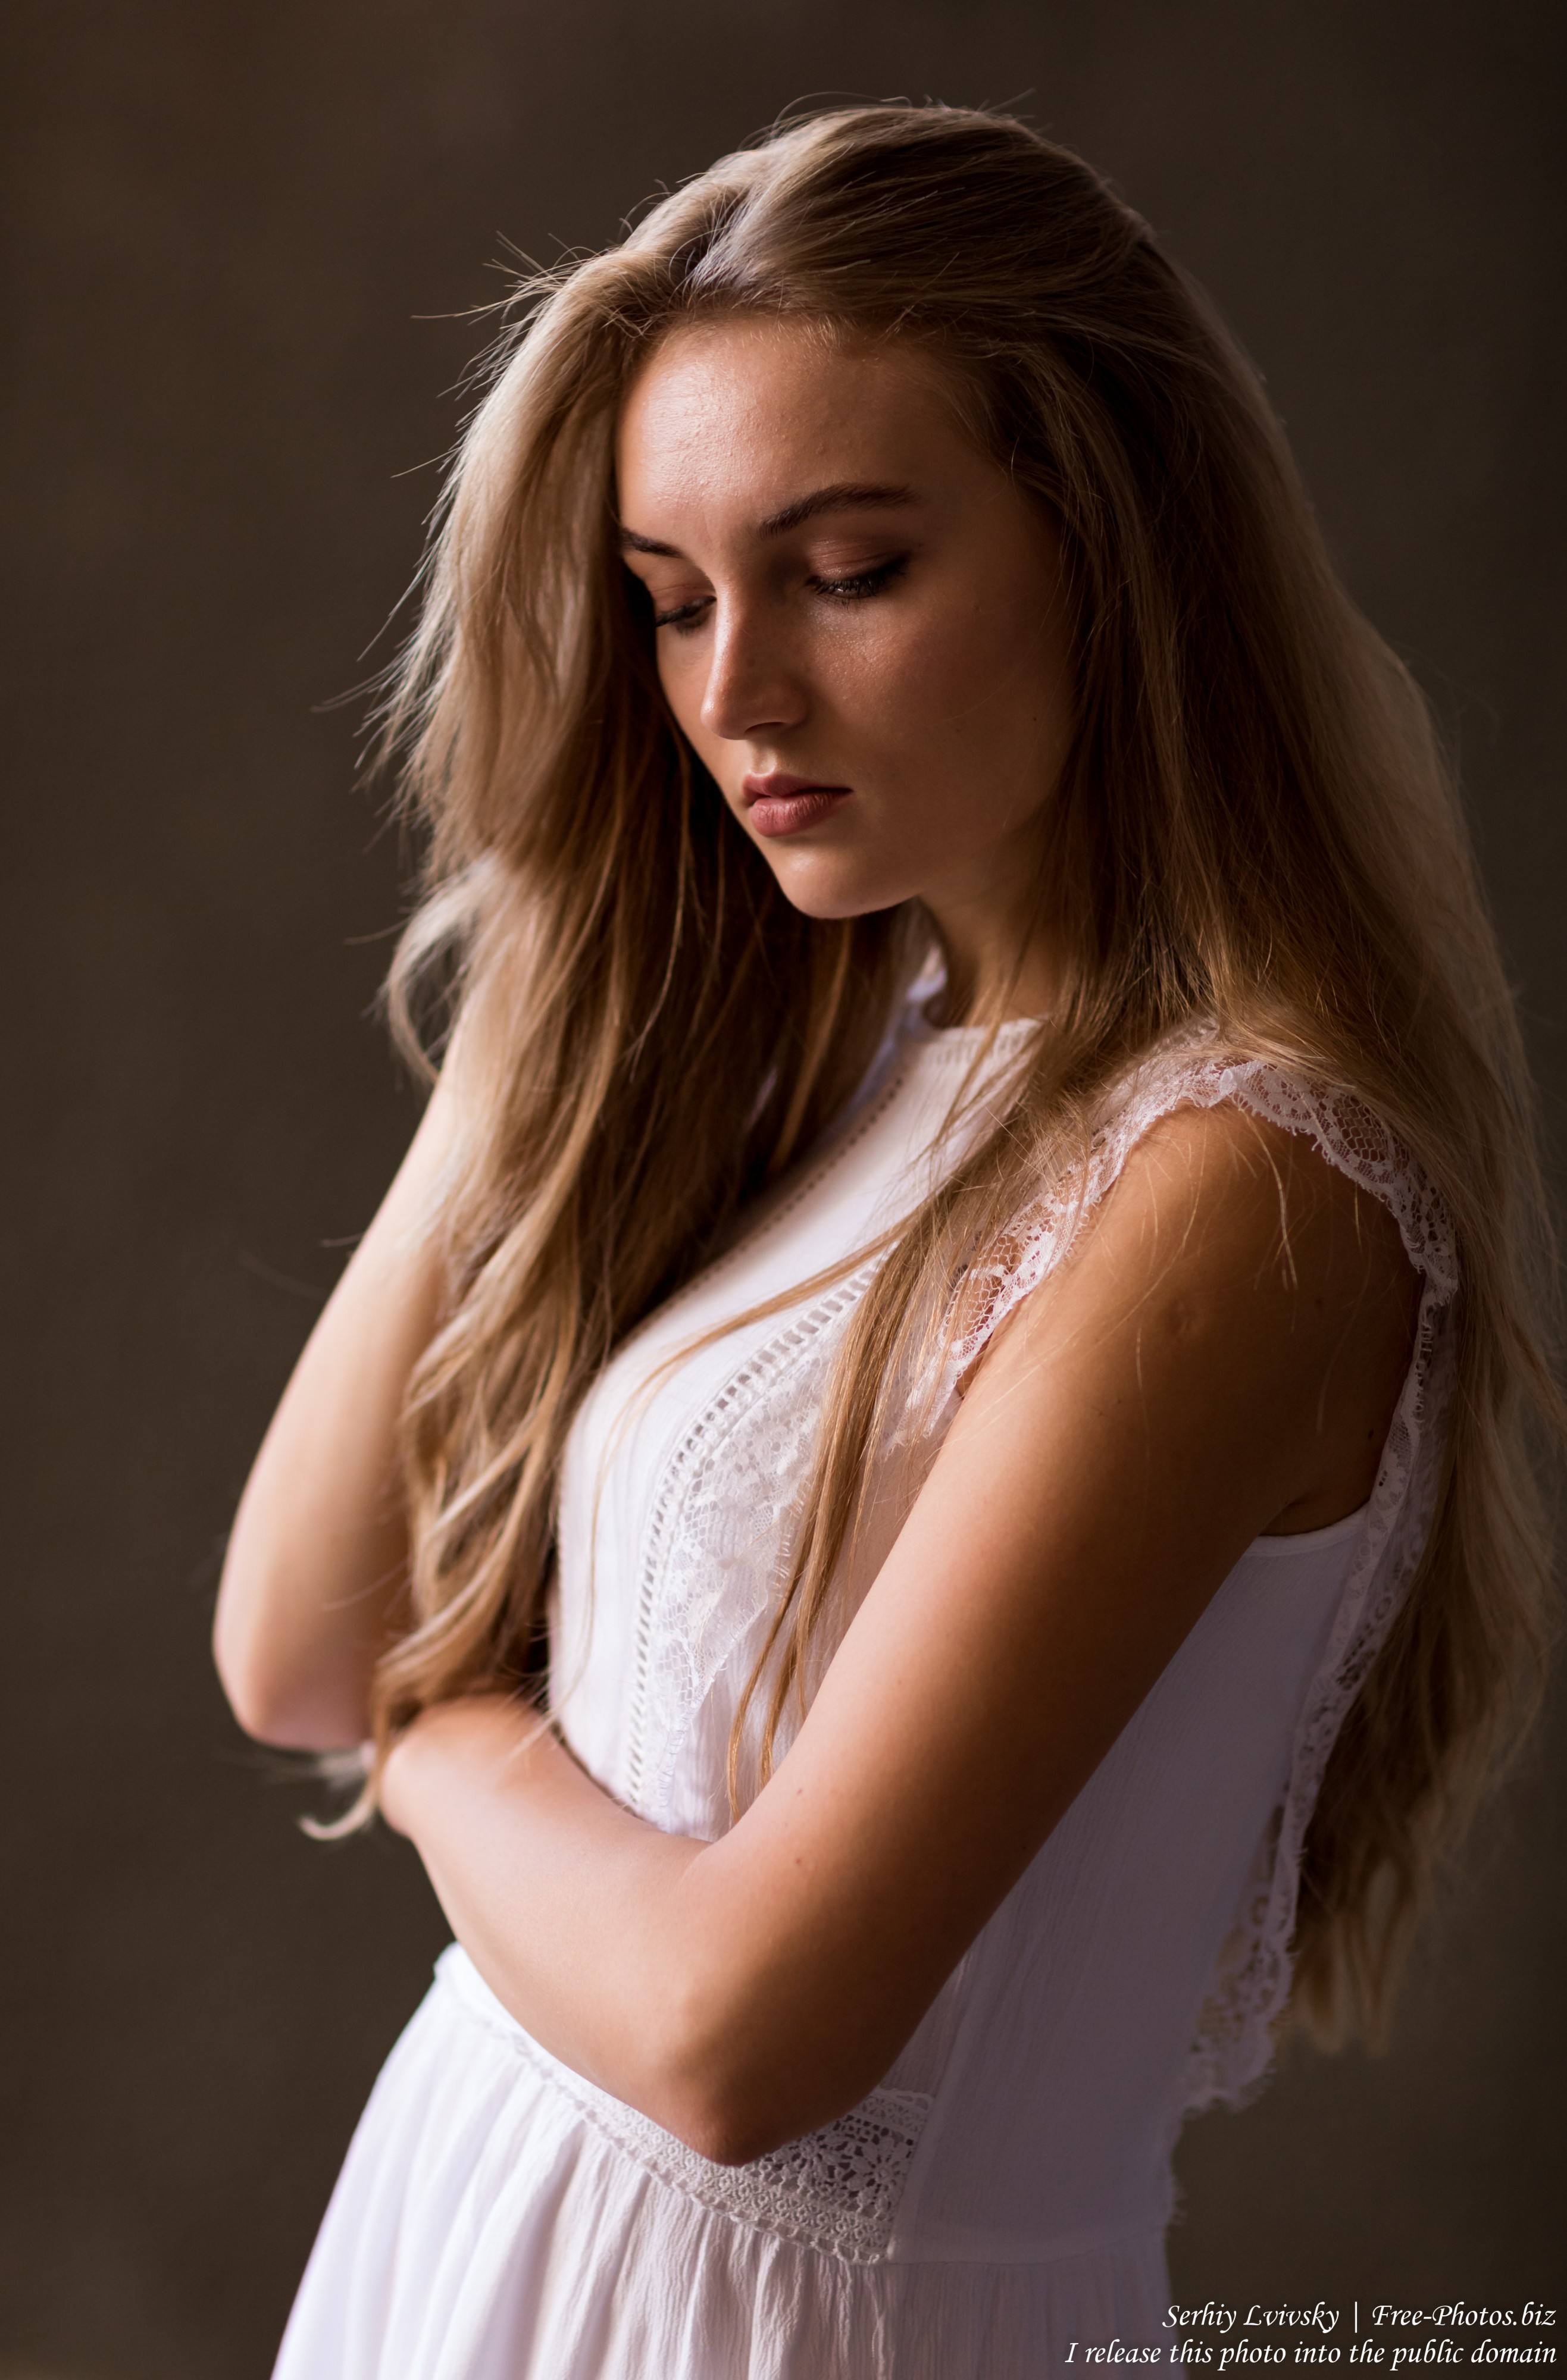 Yaryna - a 21-year-old natural blonde Catholic girl photographed in August 2019 by Serhiy Lvivsky, picture 12